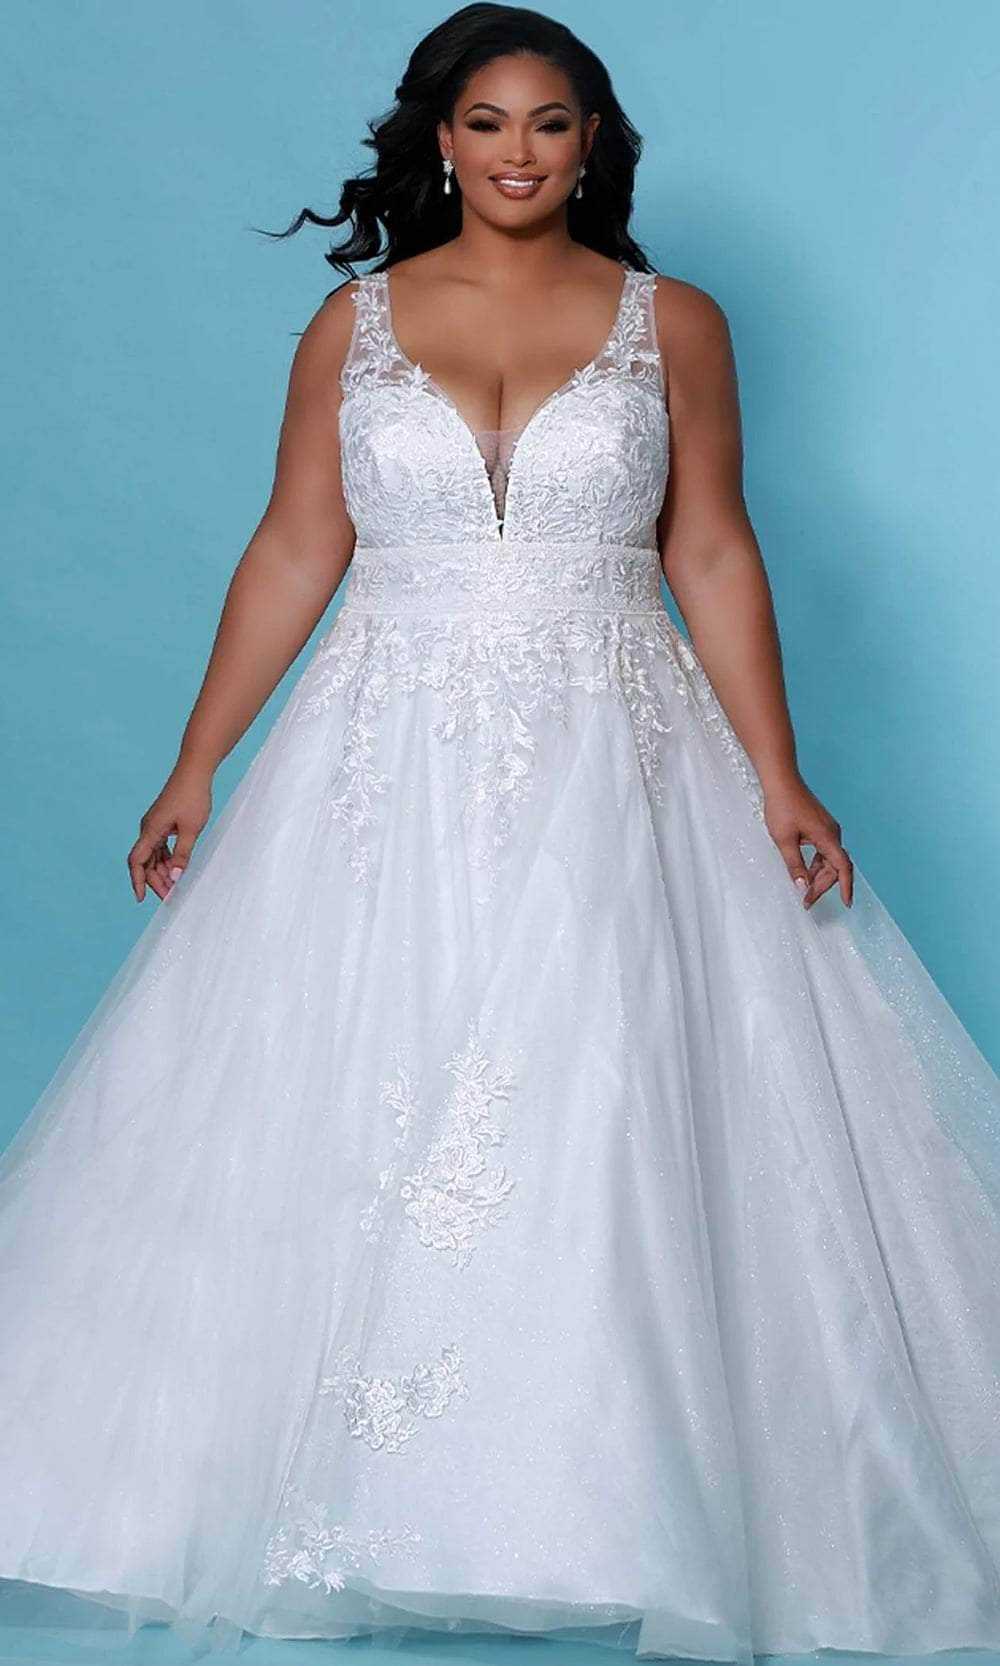 Sydney's Closet Bridal, Sydney's Closet Bridal - SC5255 Embroidered A-Line Bridal Gown